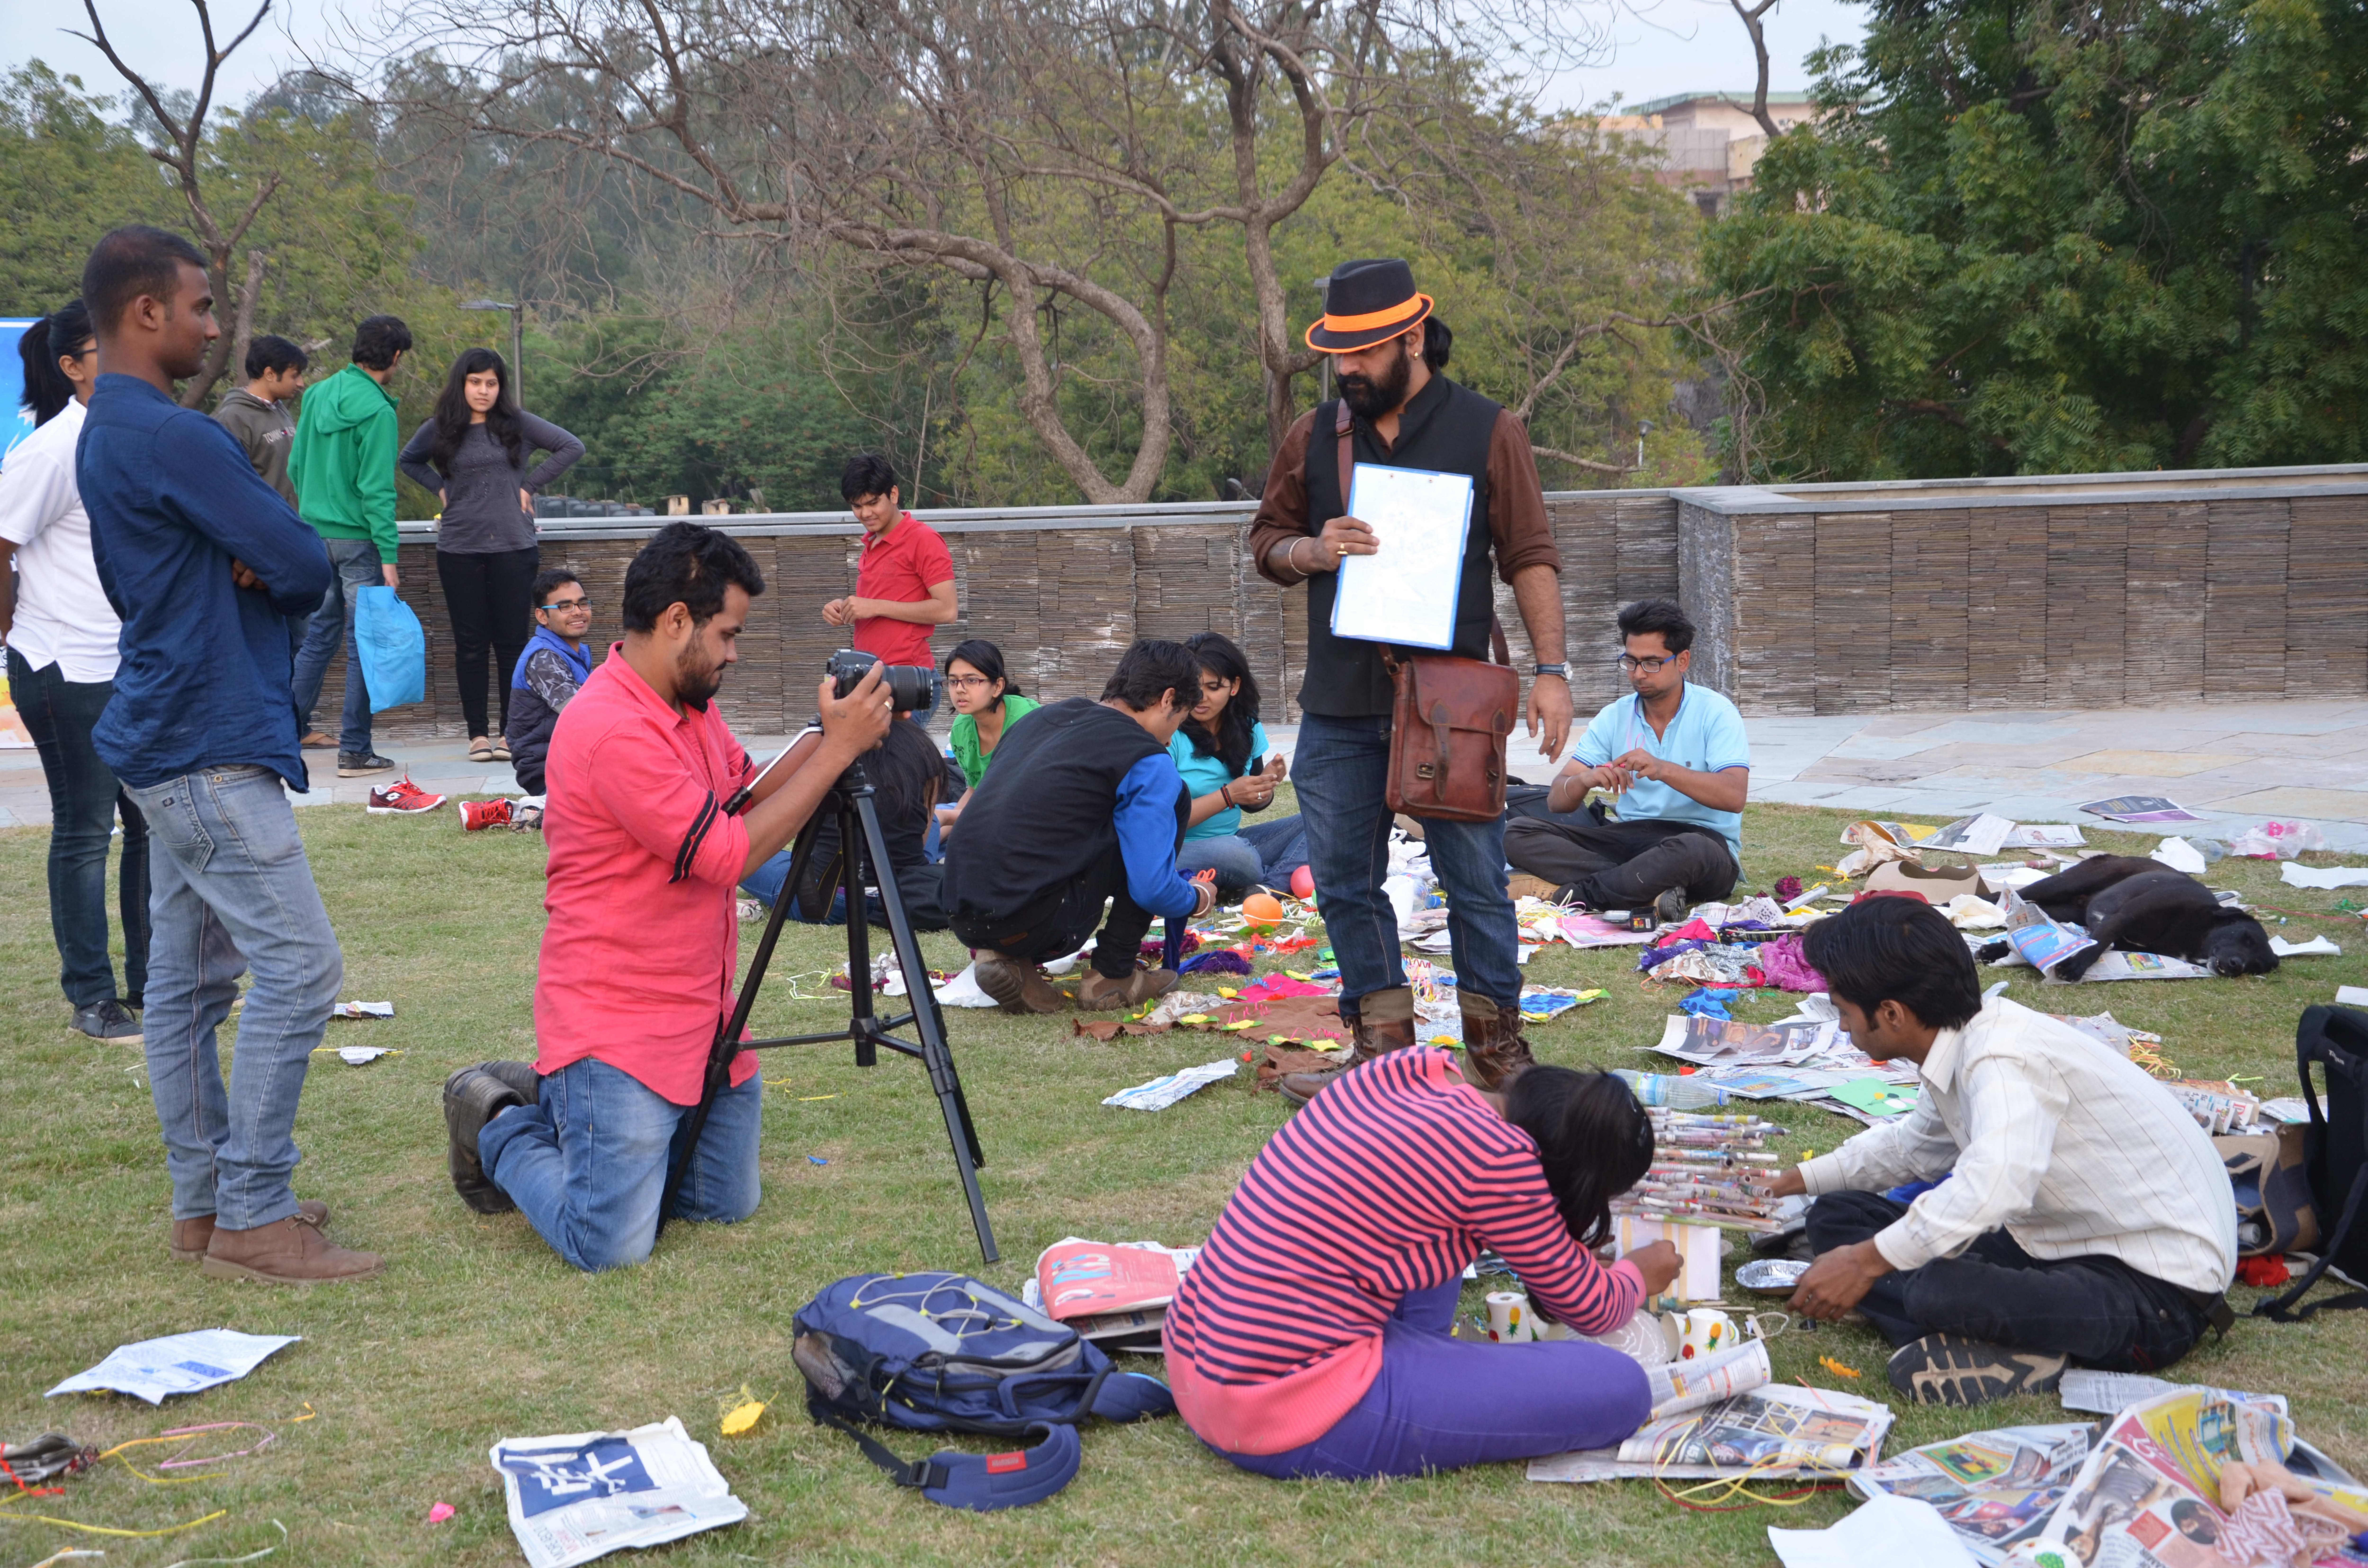 Photography classesEducation and LearningProfessional CoursesWest DelhiPunjabi Bagh